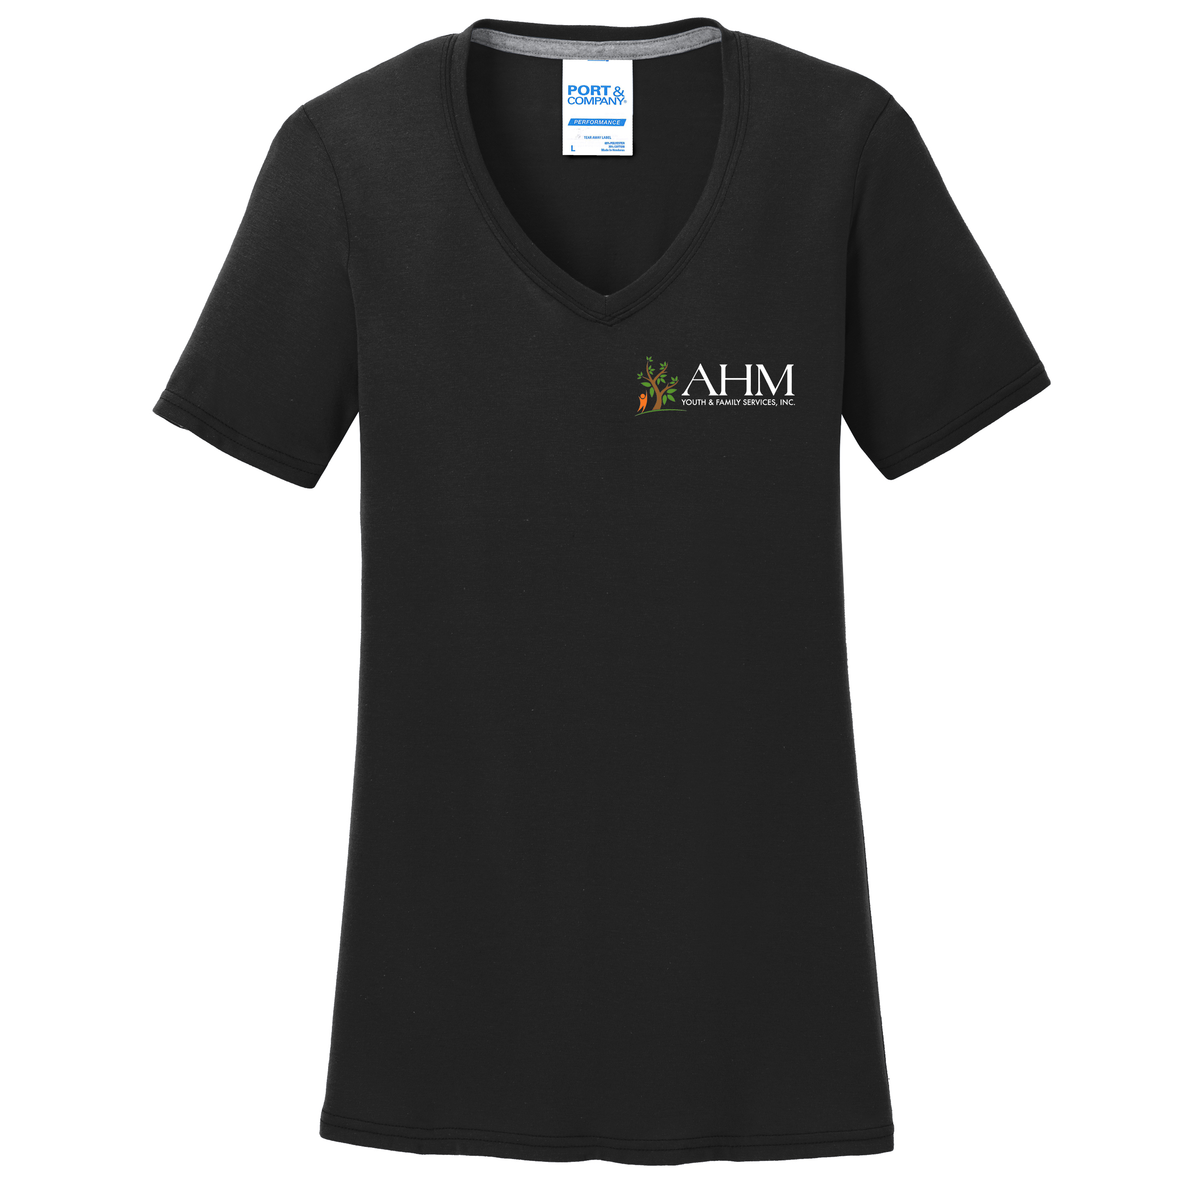 AHM Youth & Family Services Women's T-Shirt